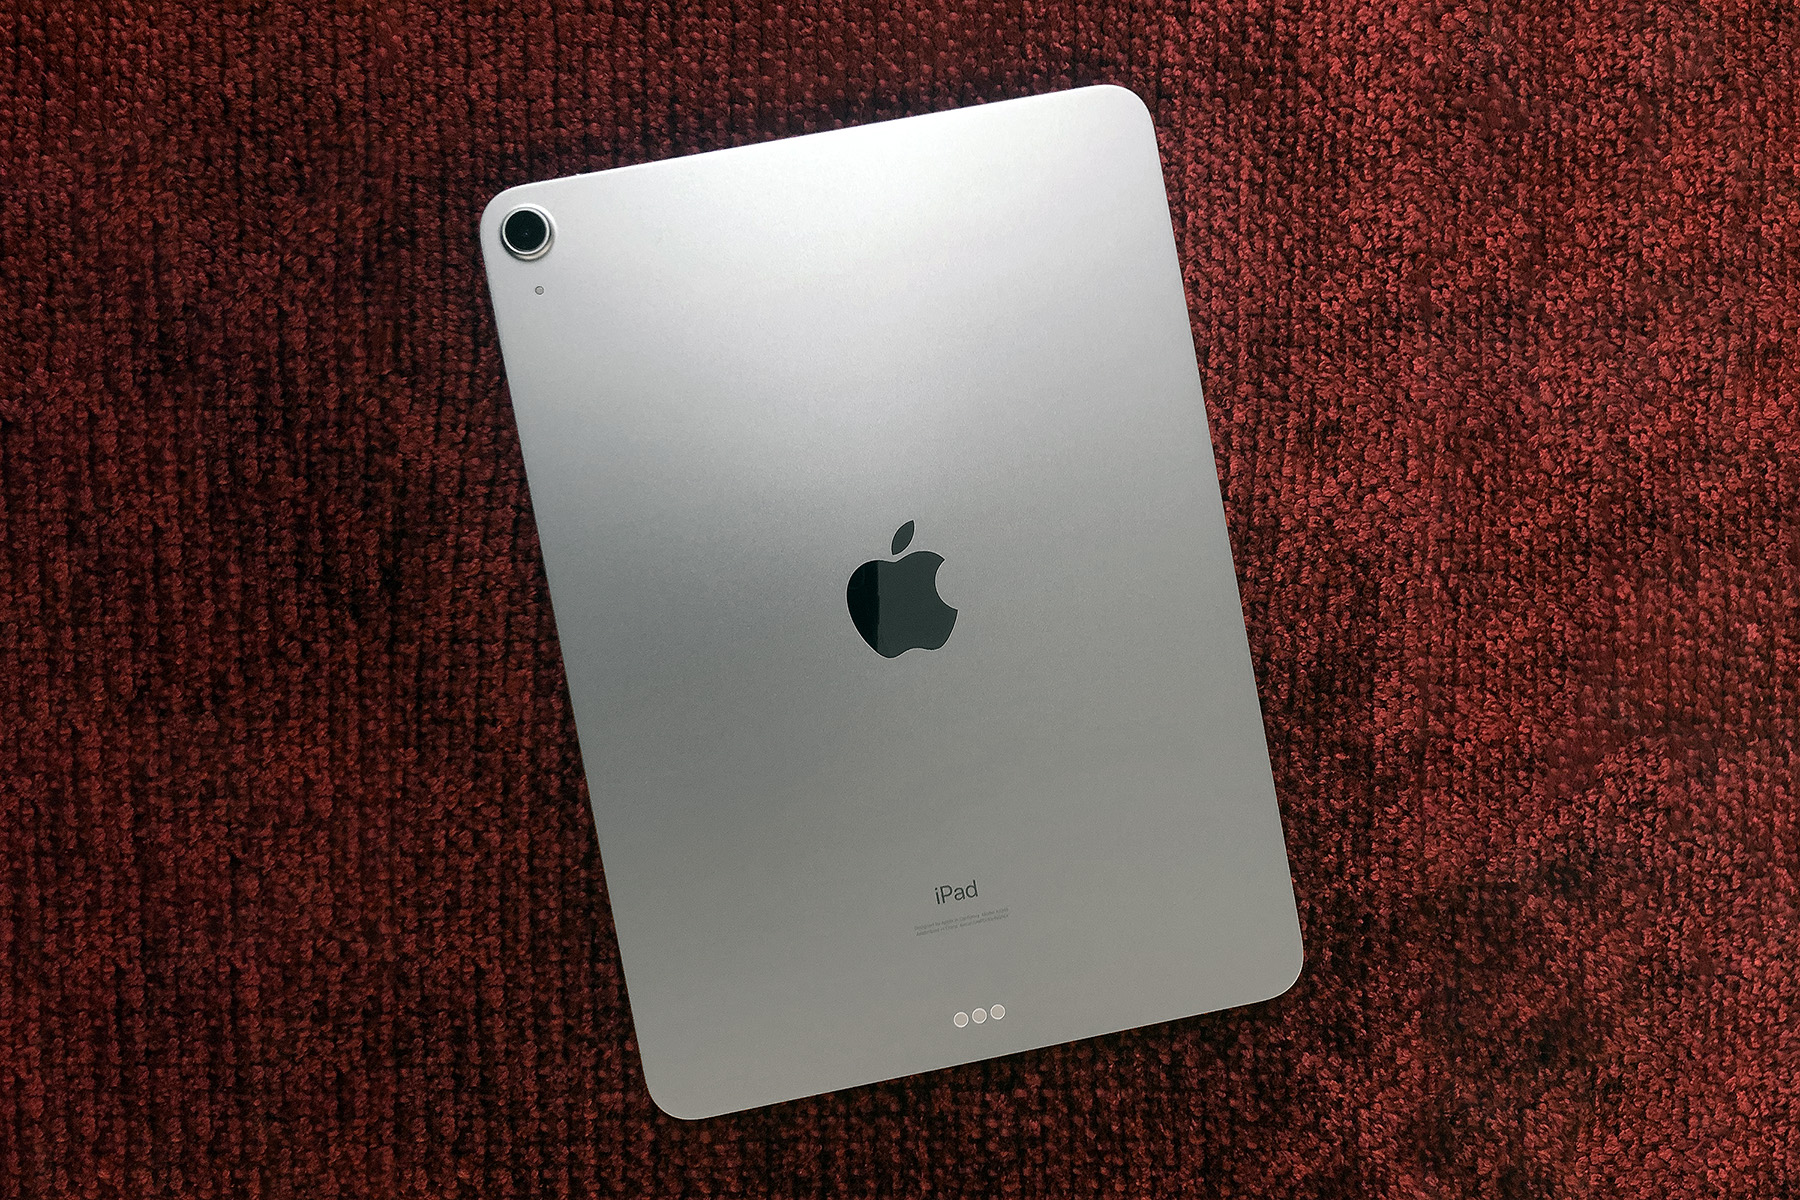 Apple’s iPad Air returns to a characterize low $539 at Amazon